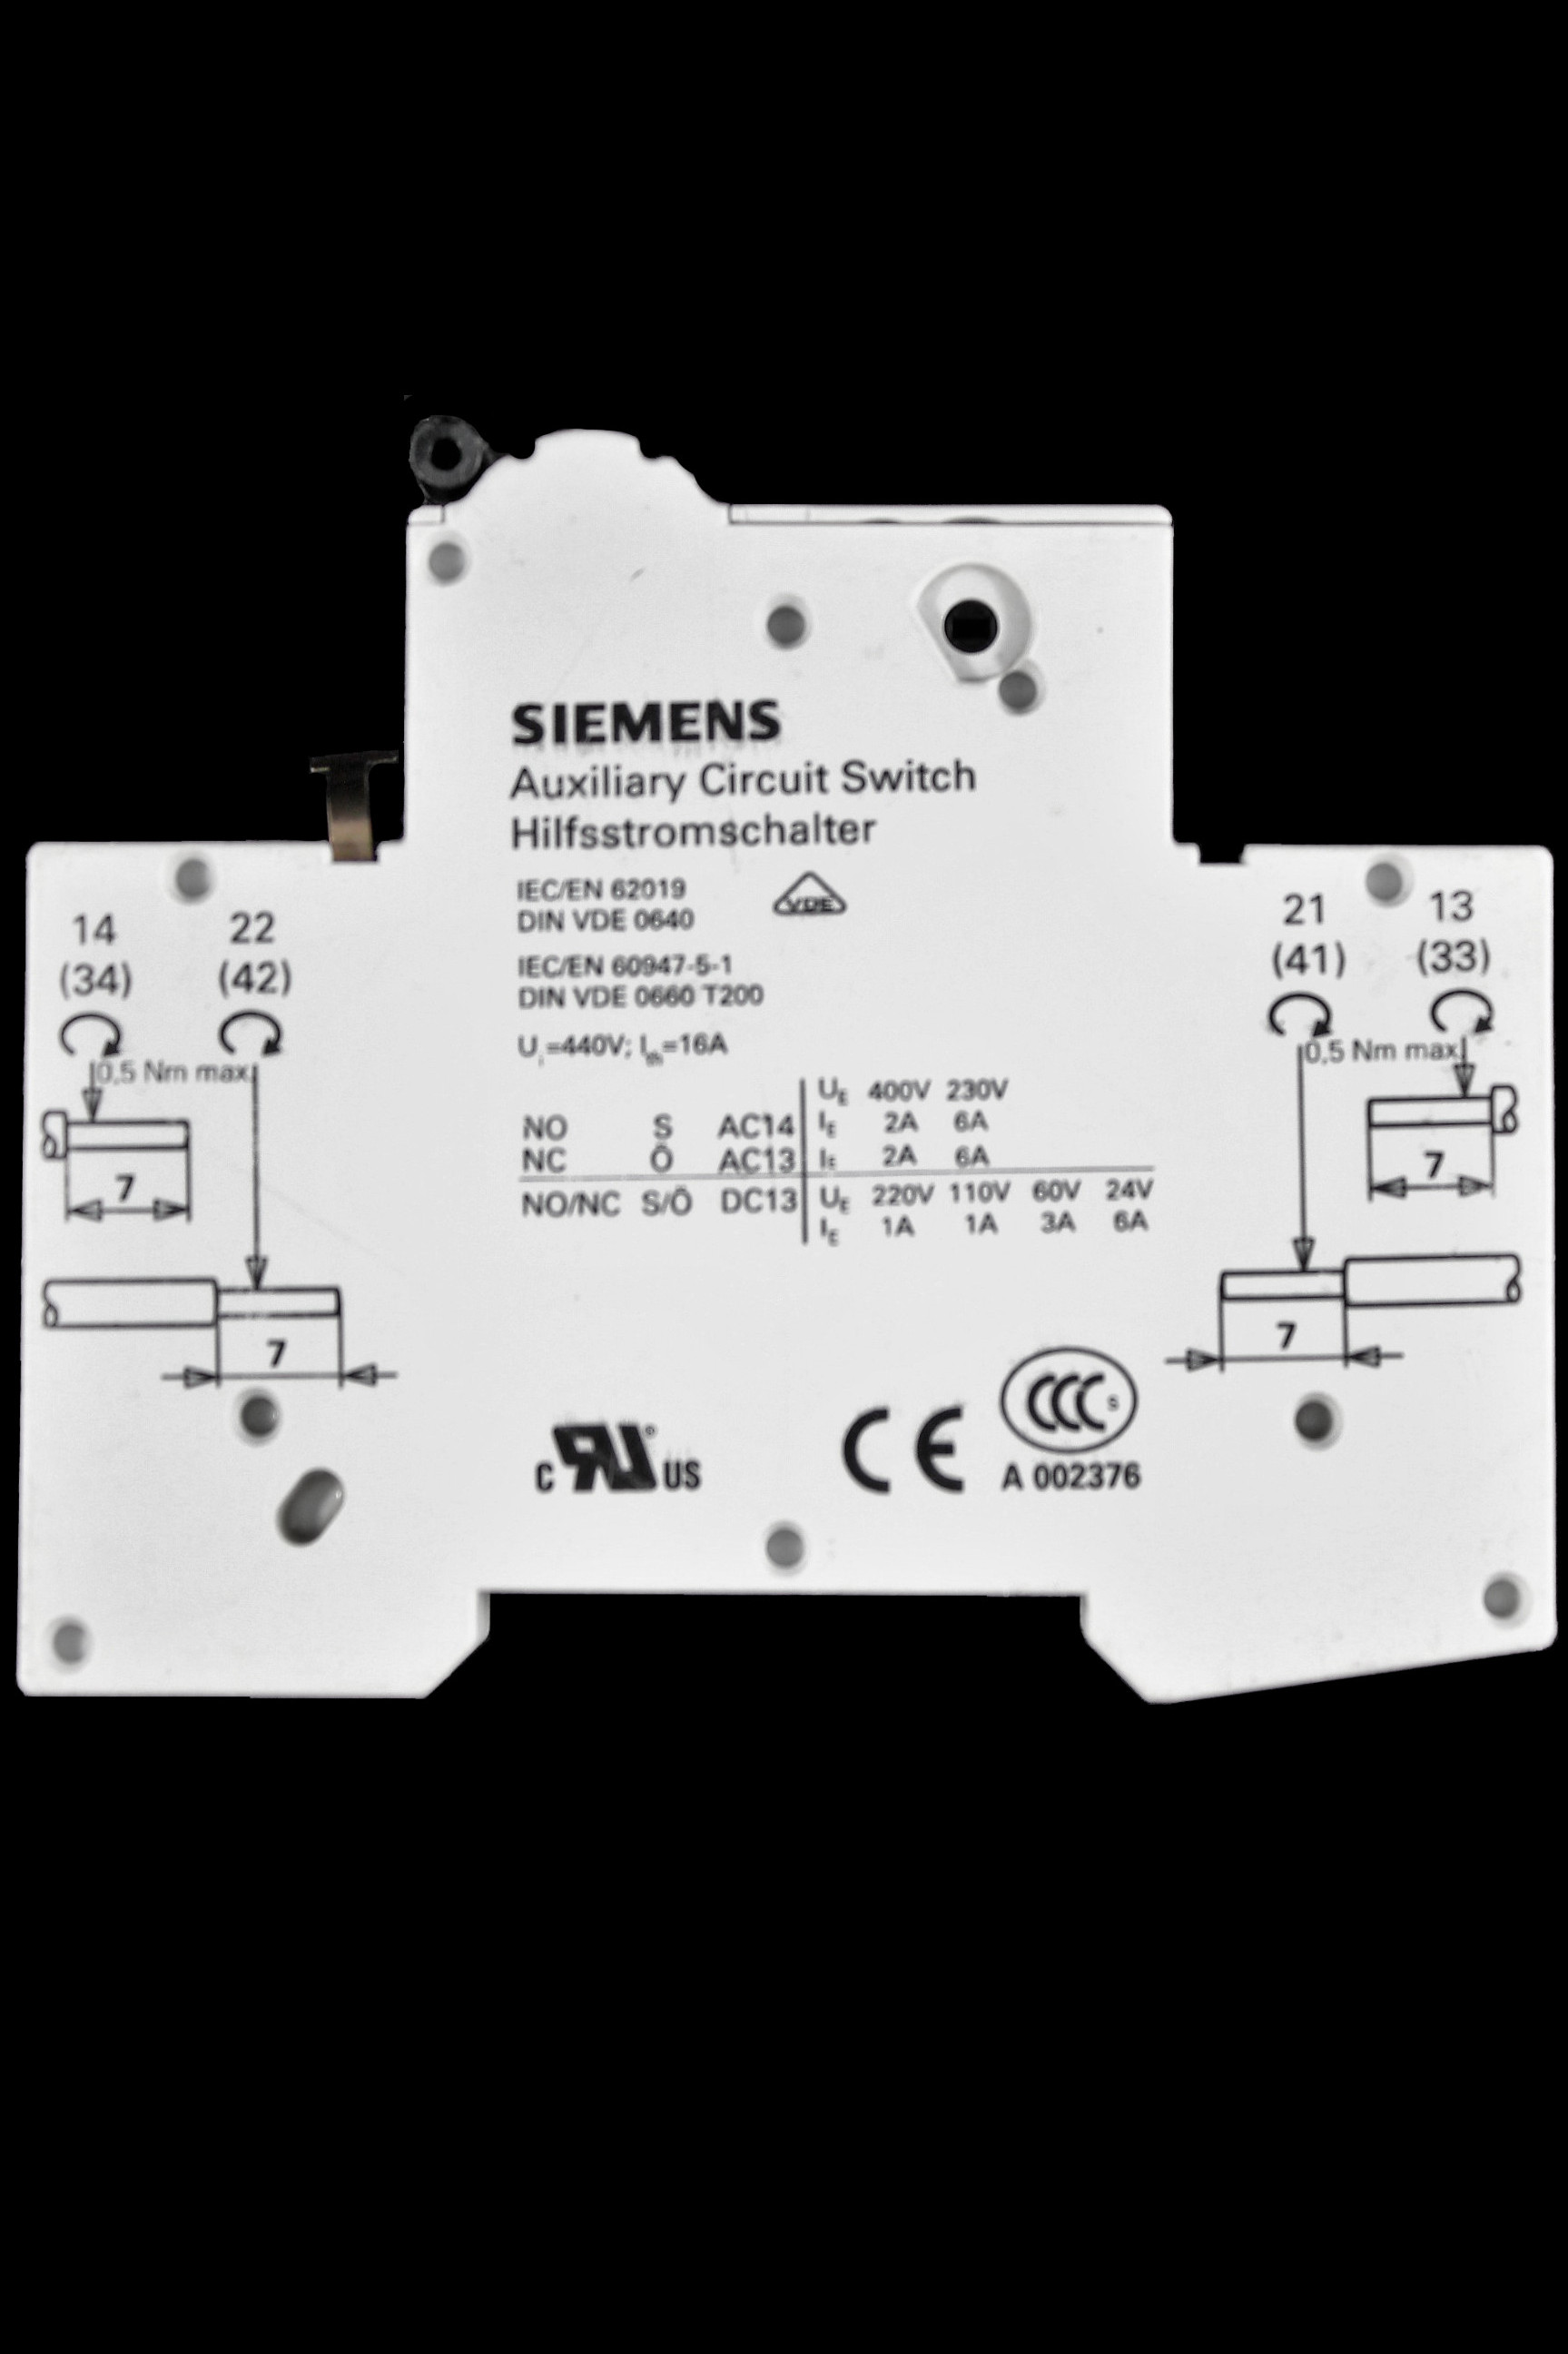 SIEMENS AUXILIARY CIRCUIT SWITCH 5ST3010 AS